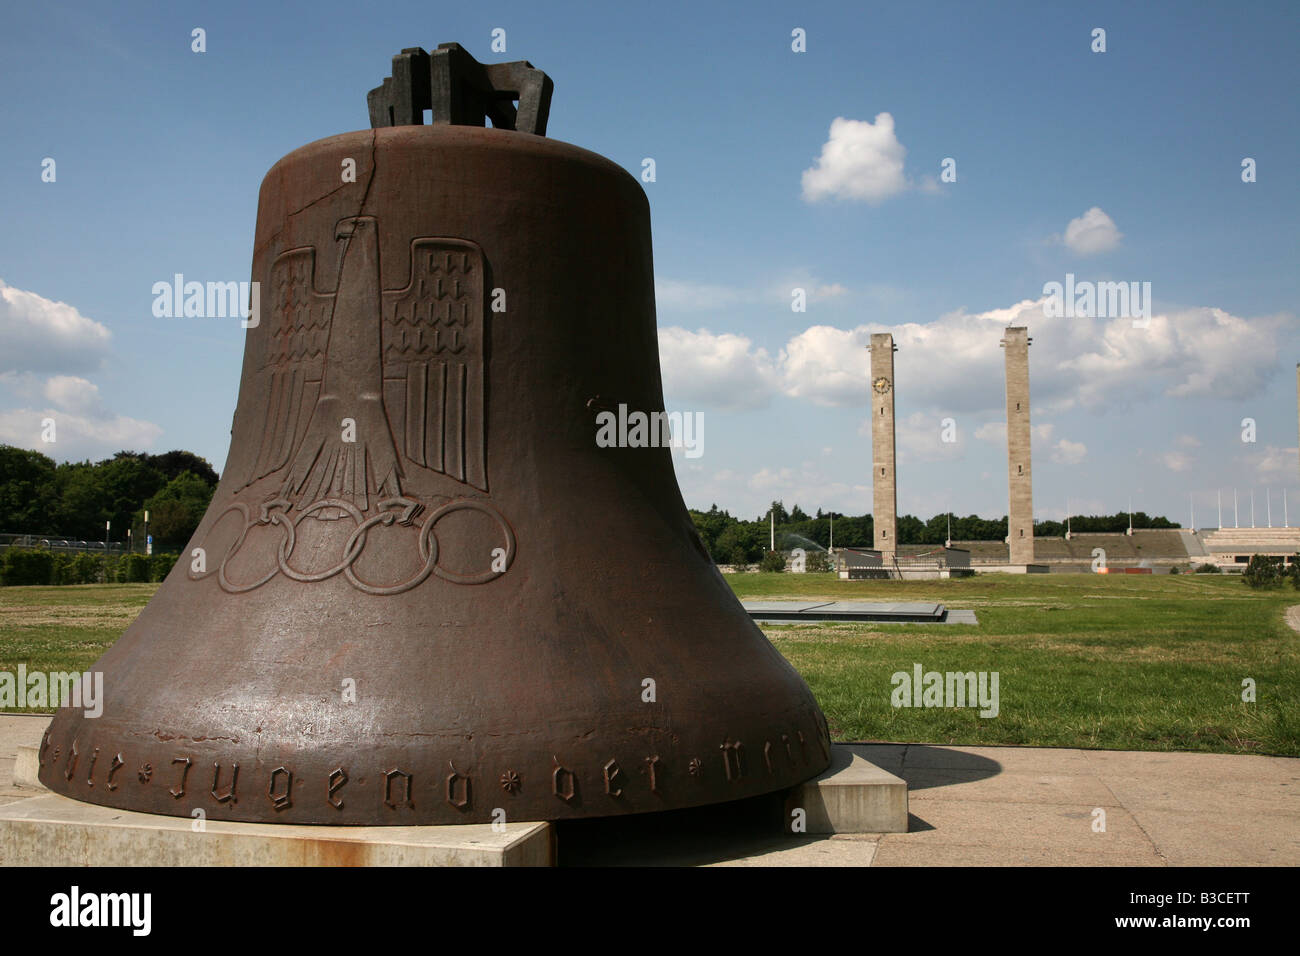 Olympic Bell with Nazi and Olympic symbolic in Olympia Stadium in Berlin, Germany Stock Photo